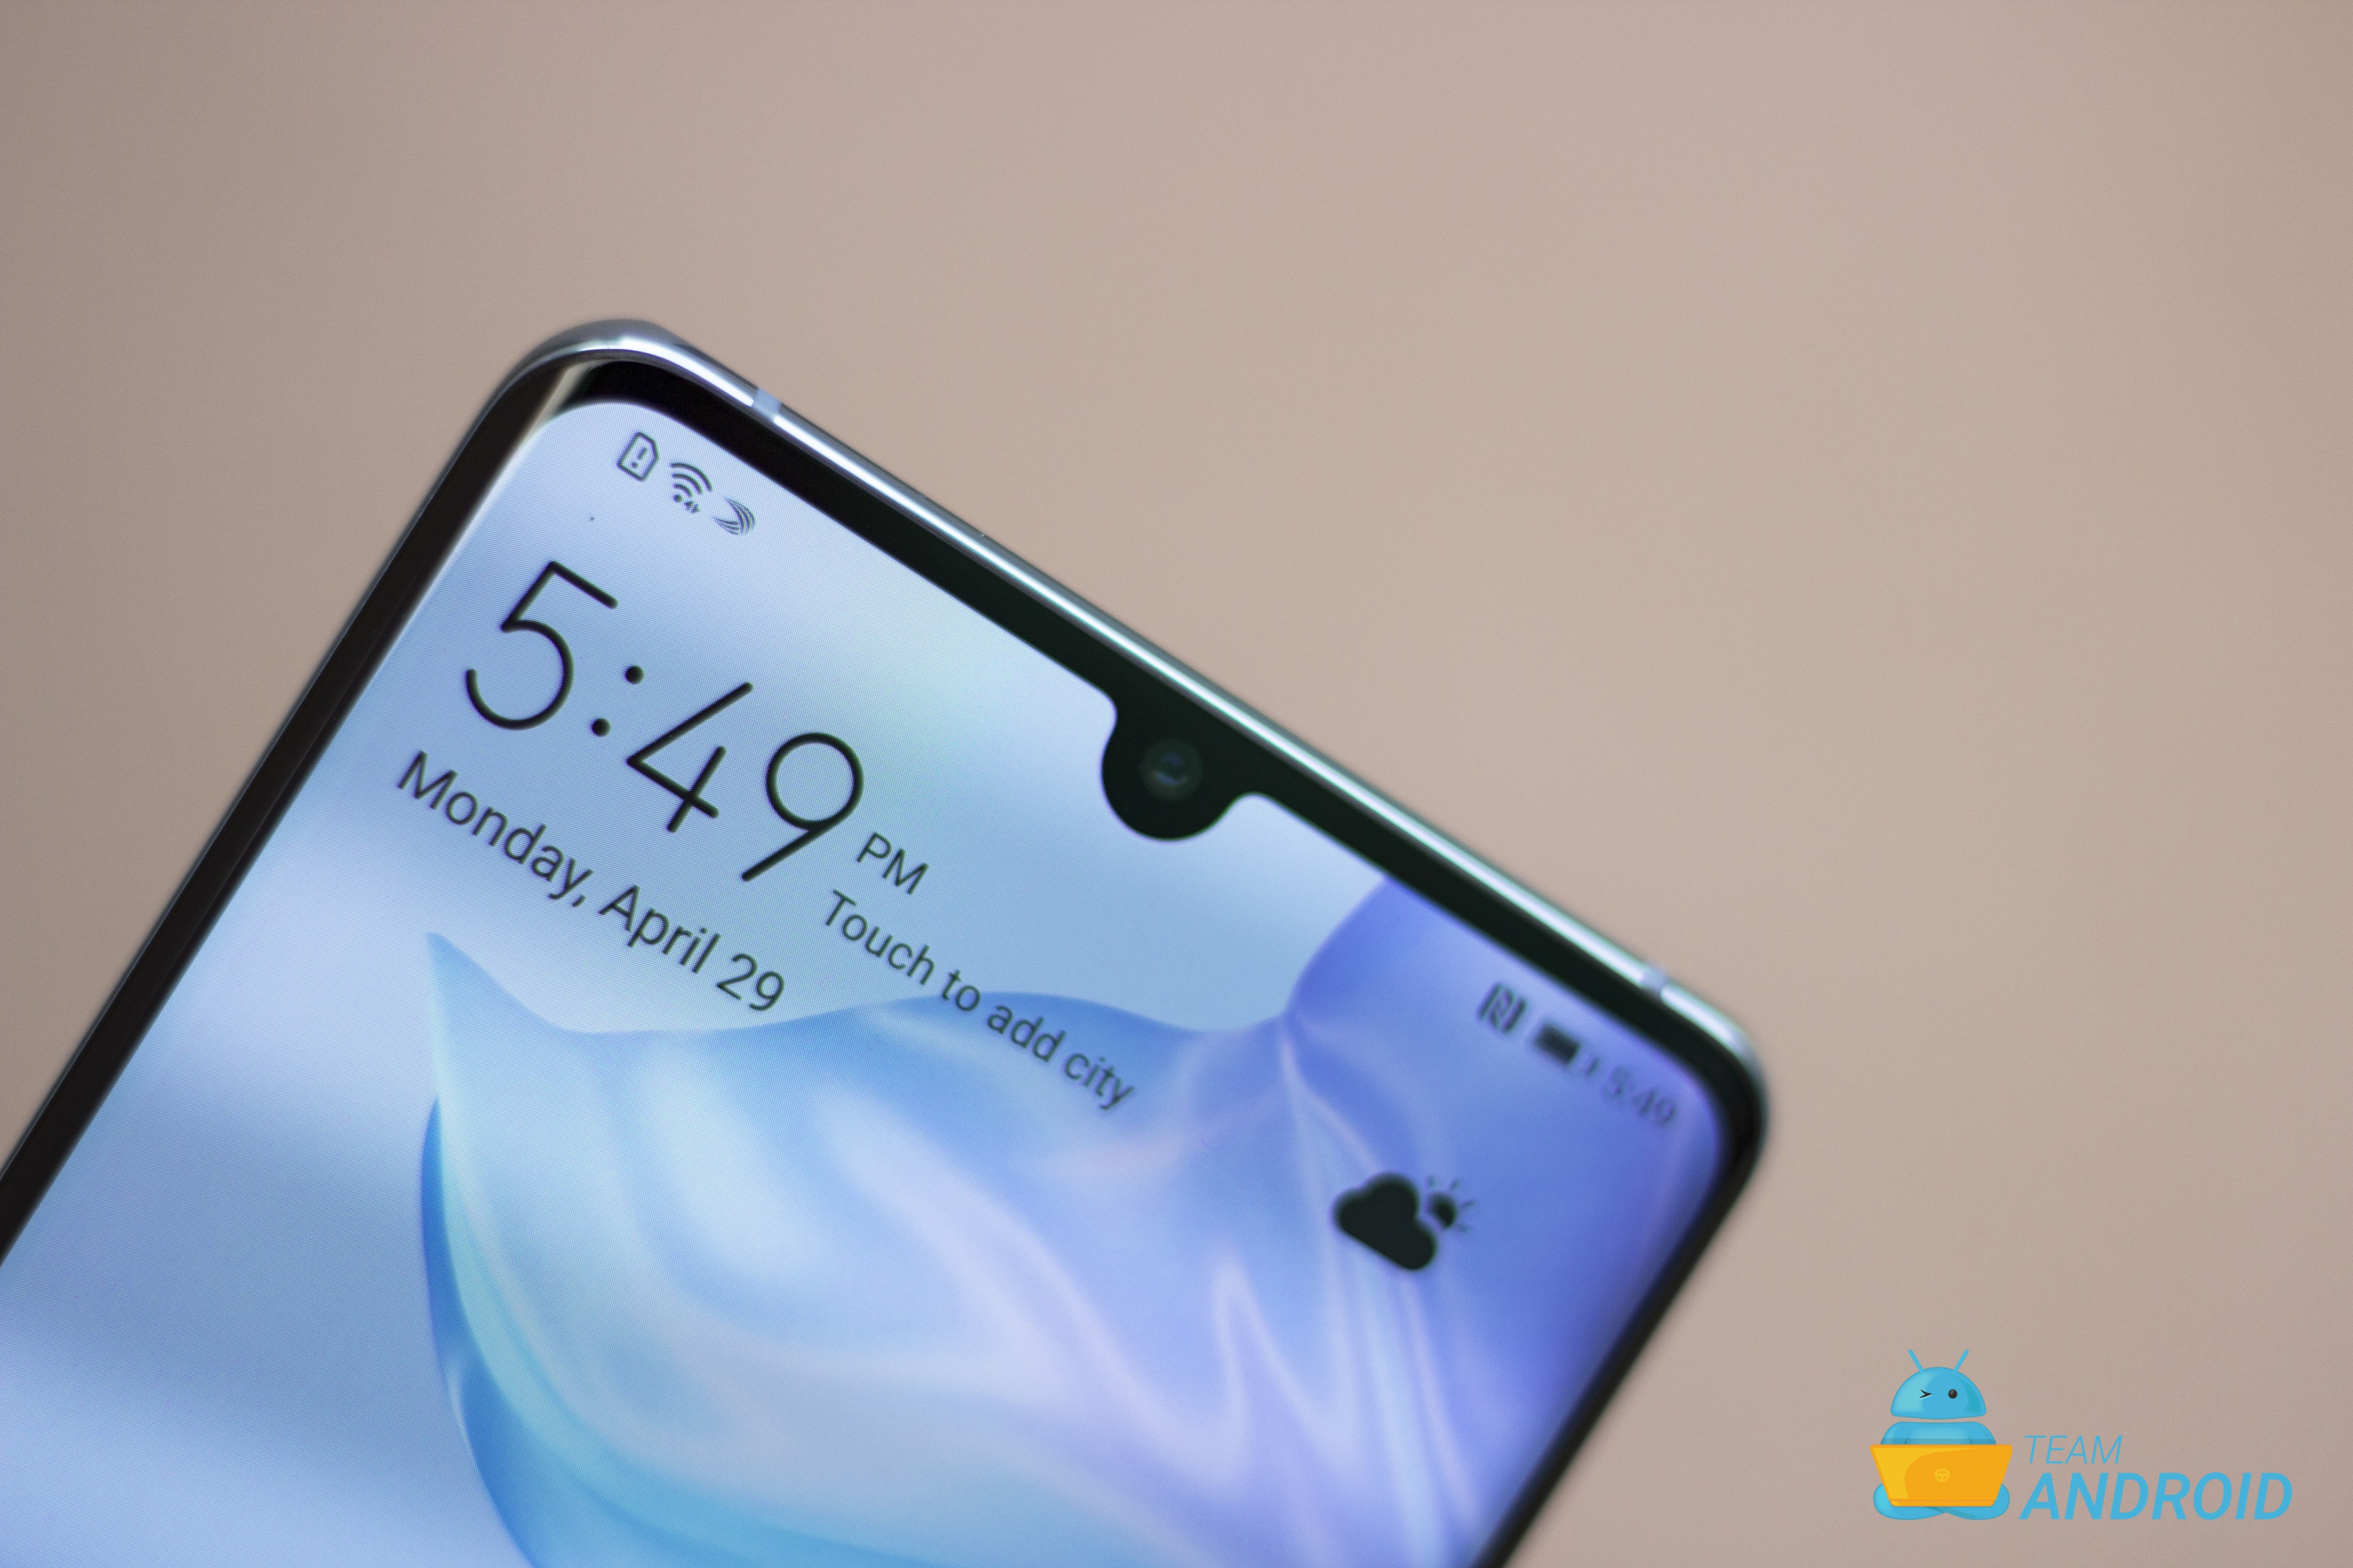 Huawei P30 Pro Review - Excellent Photography, Design and Performance to Match 60